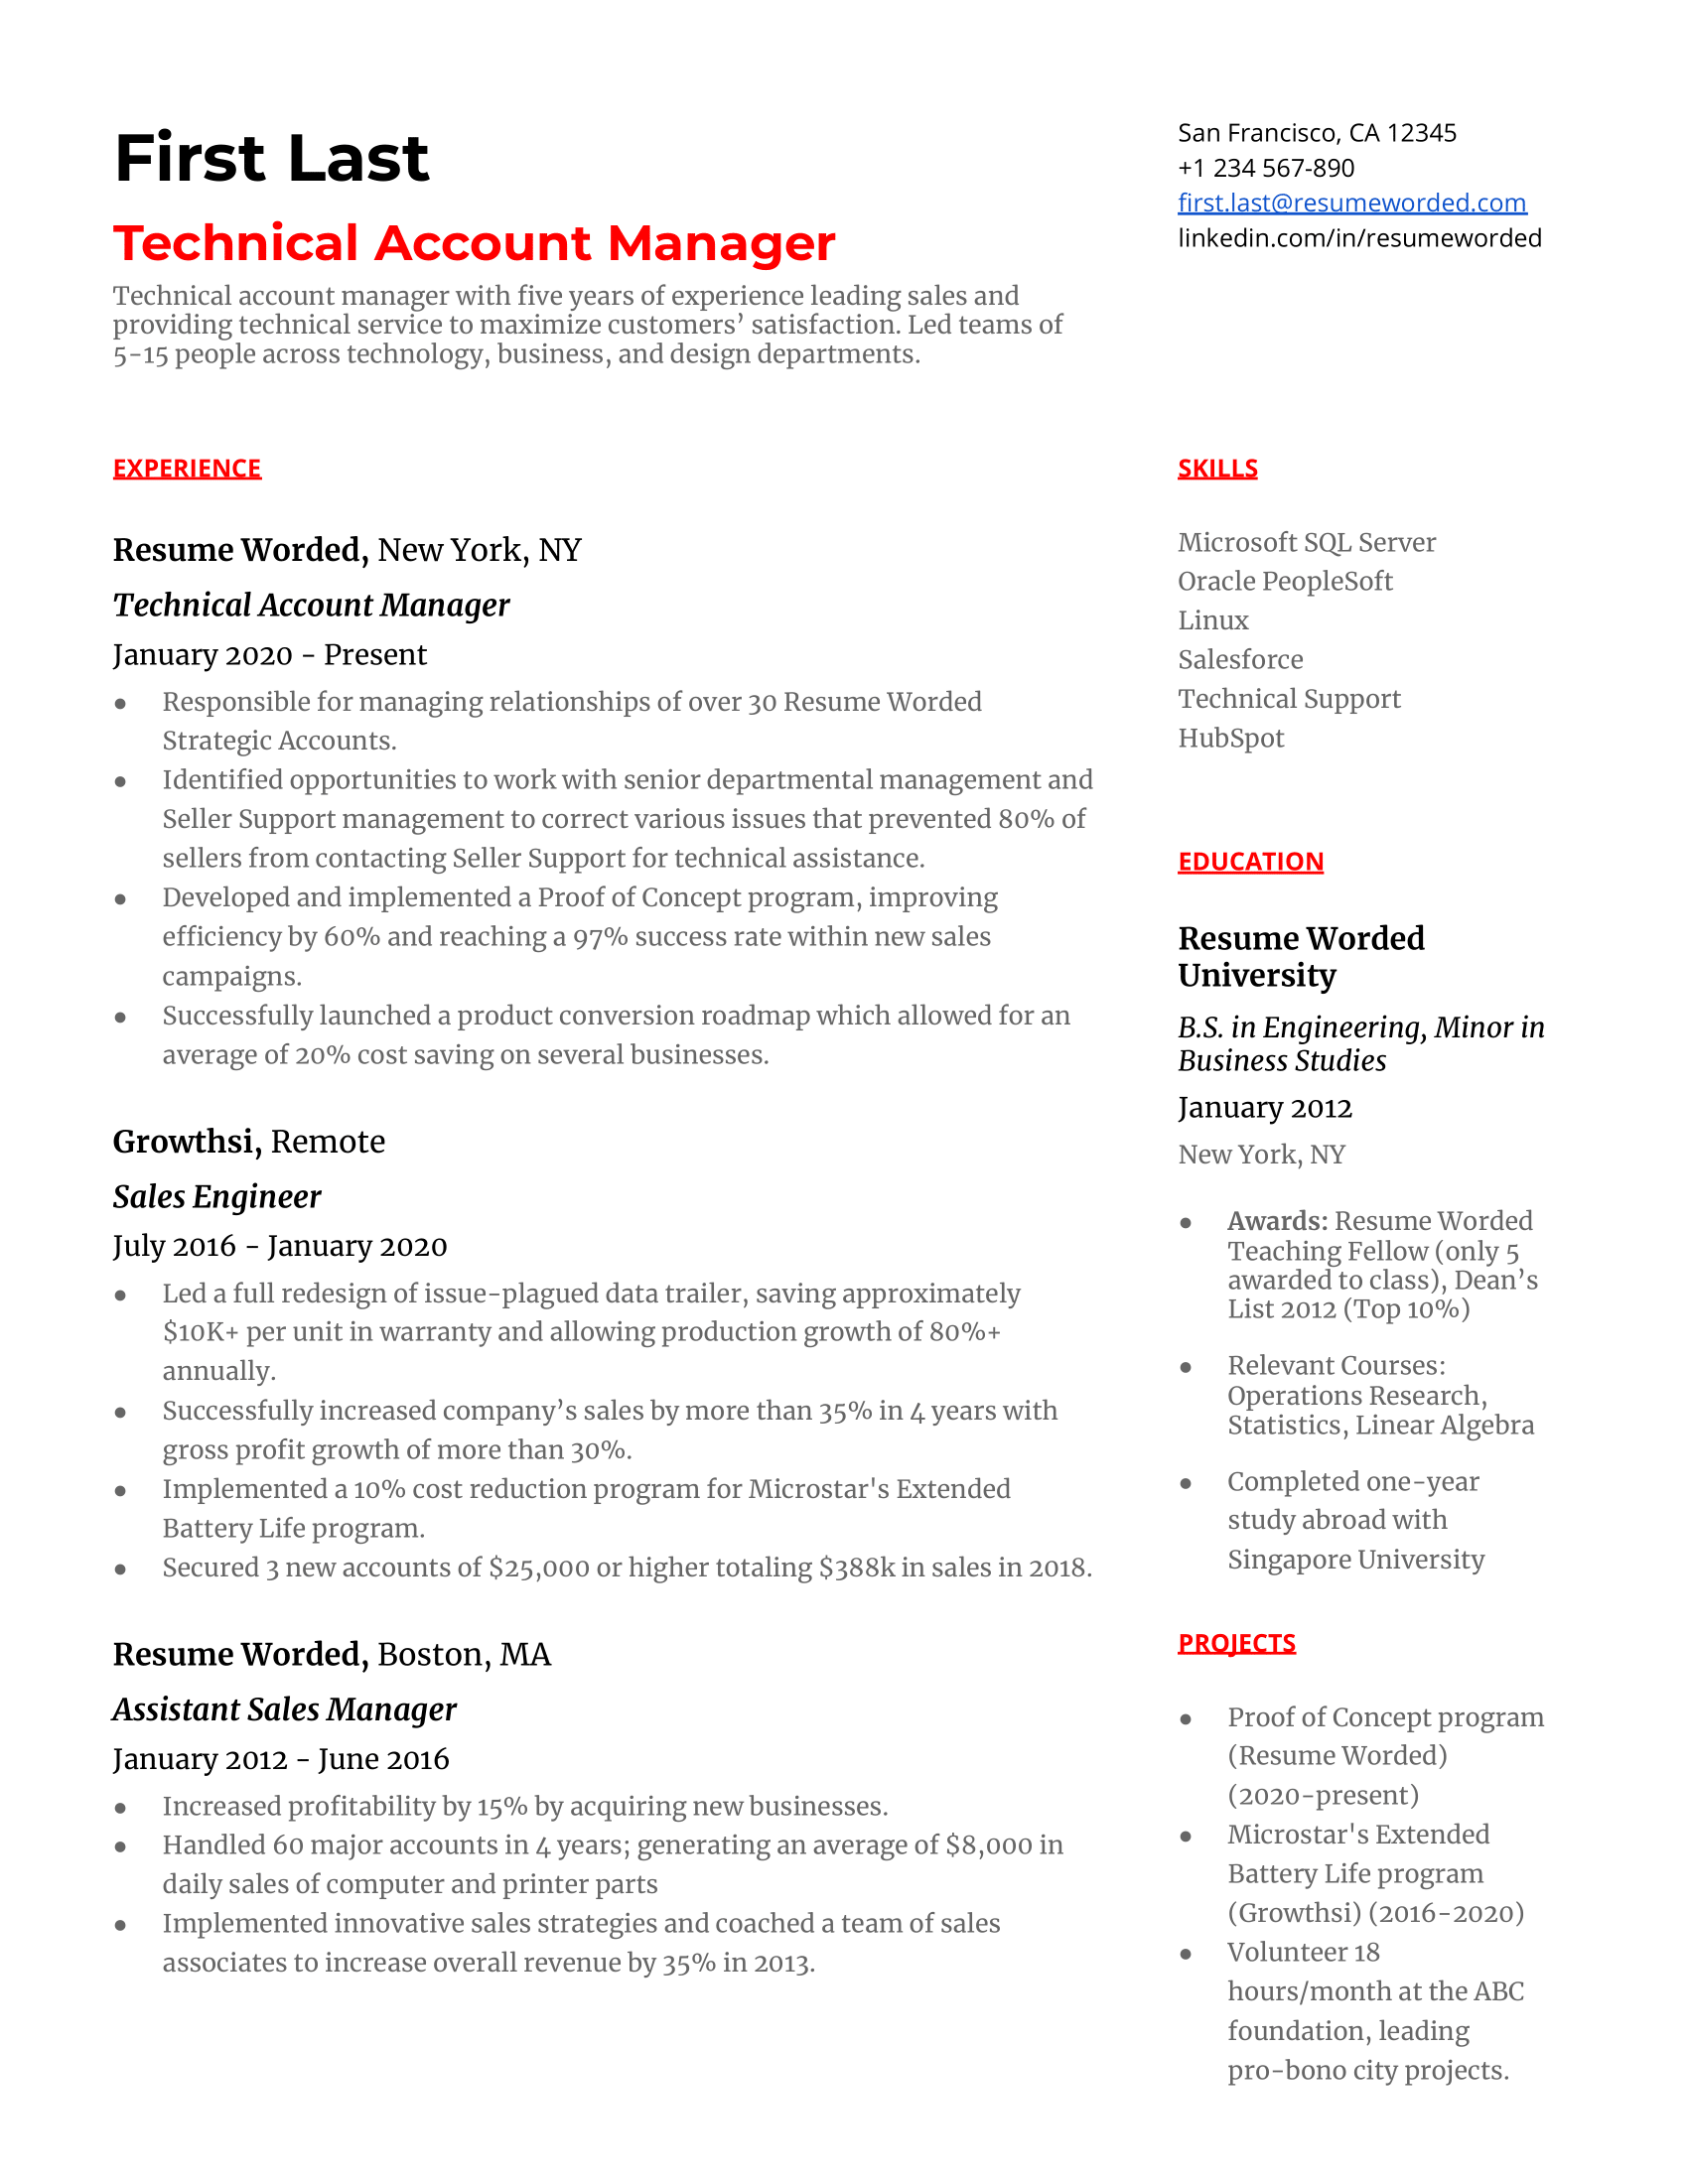 Technical Account Manager Resume Template + Example